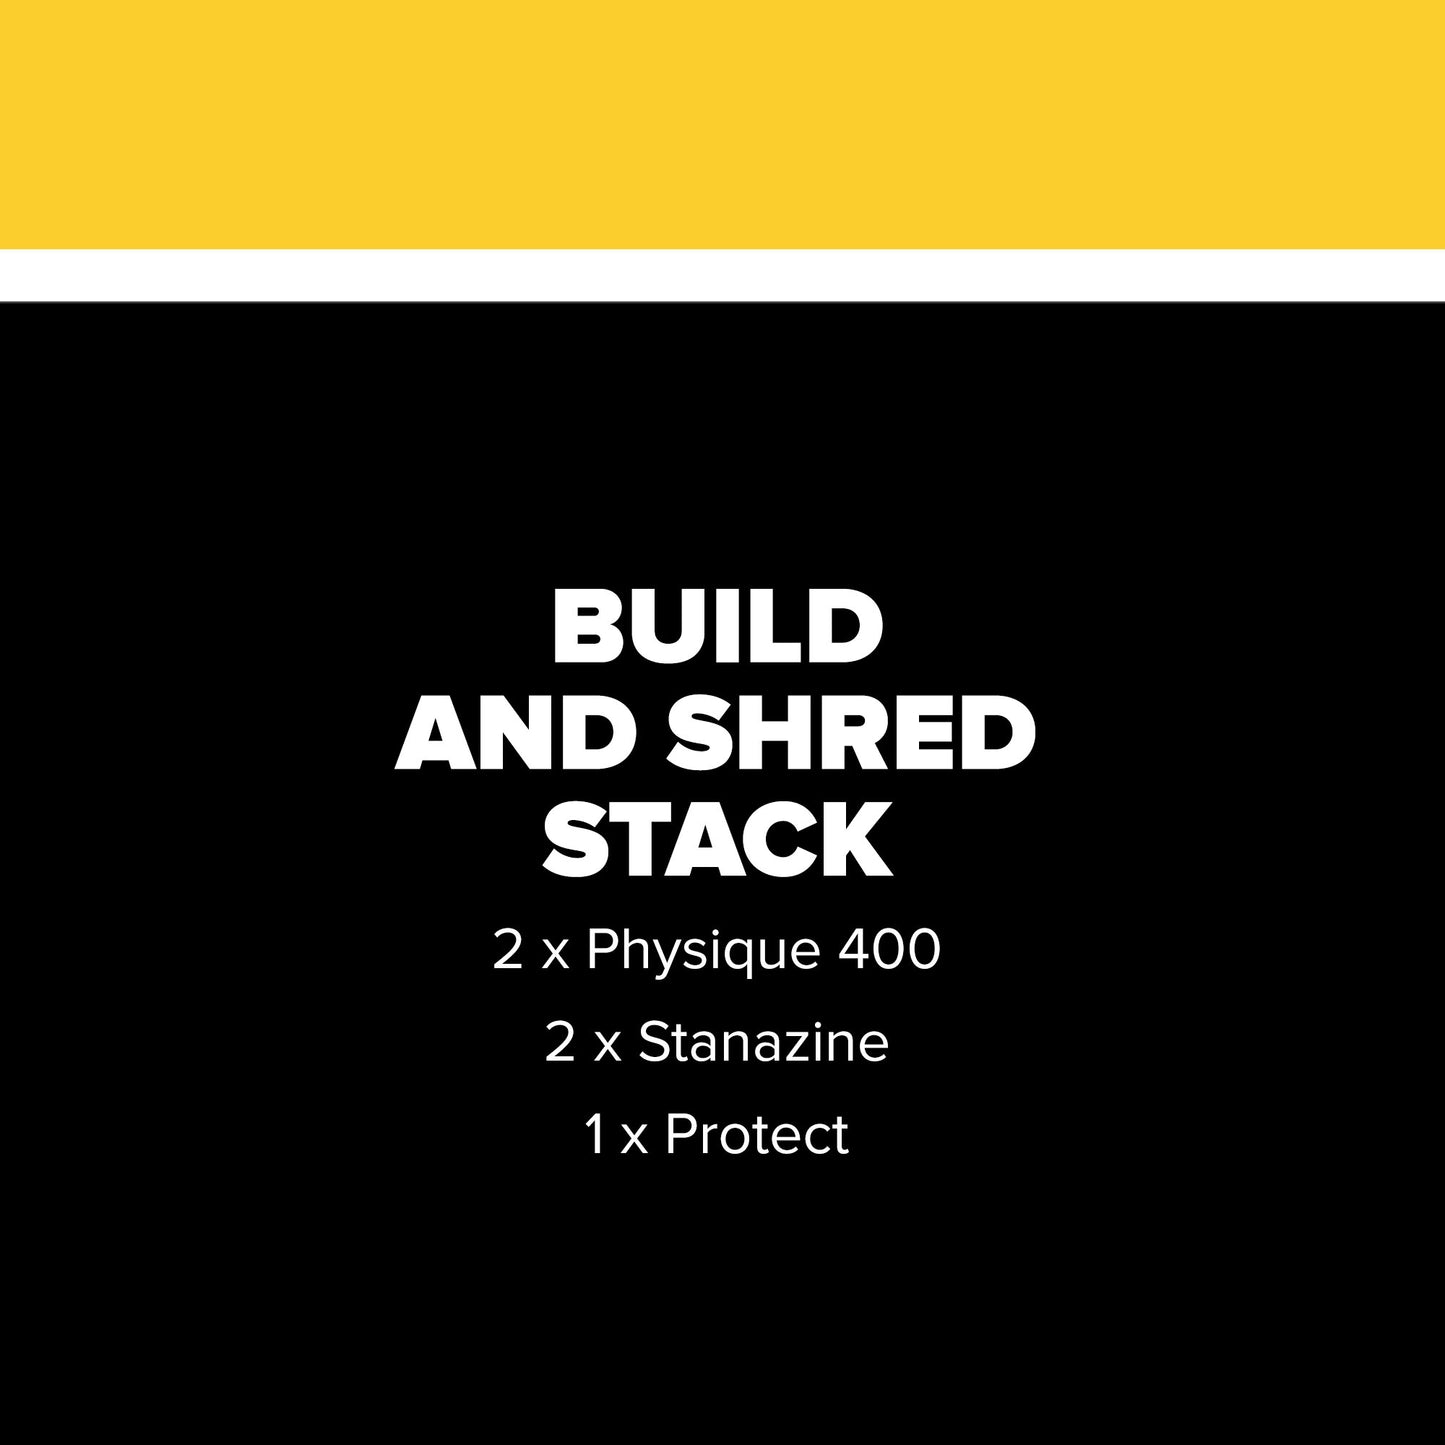 ES - BUILD AND SHRED STACK